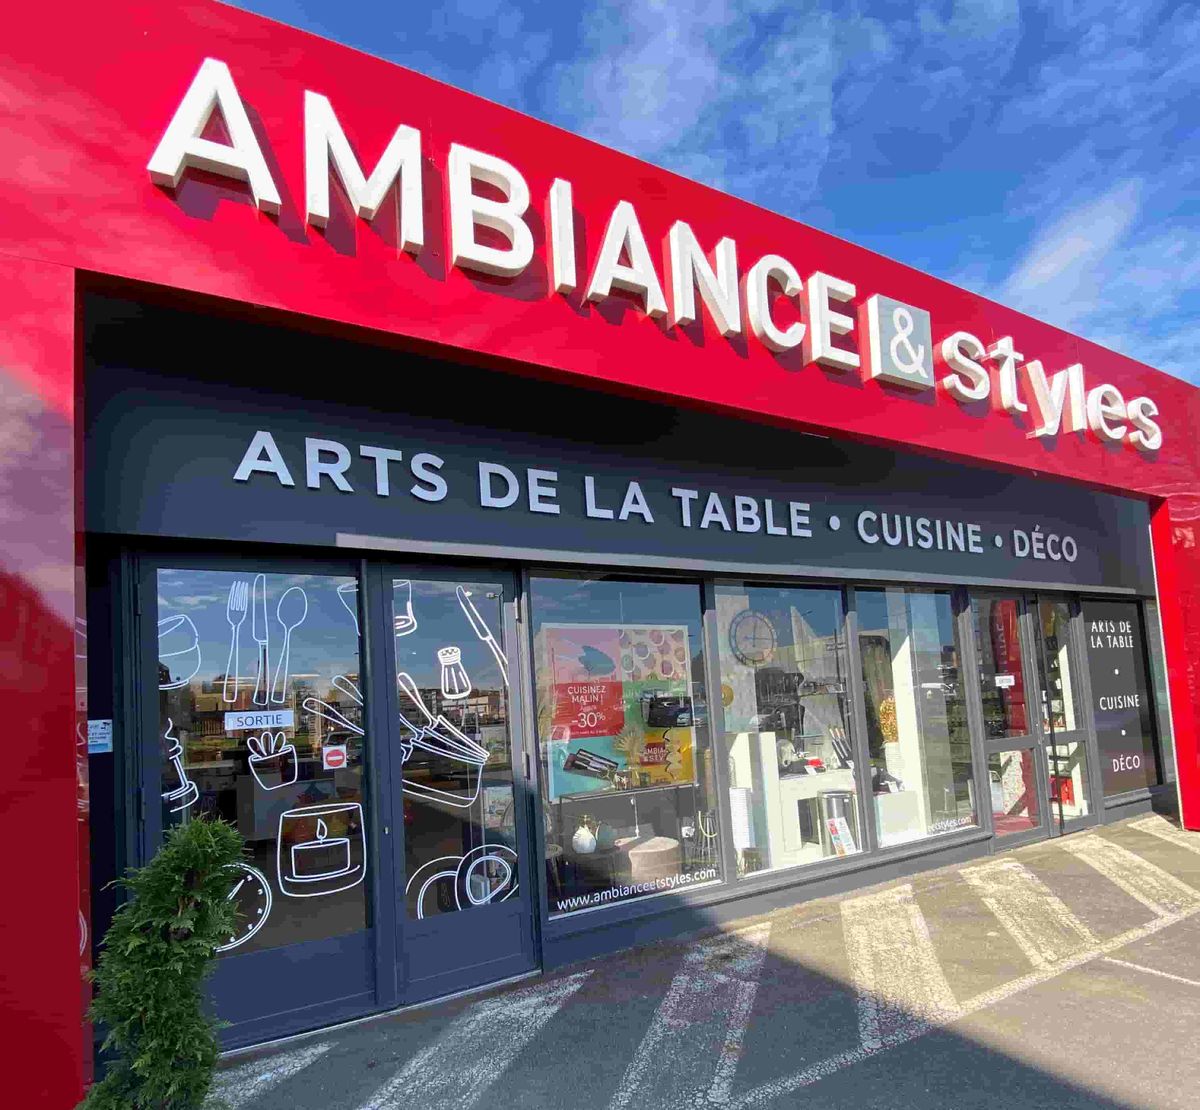 Autocuiseurs - Ambiance & Styles